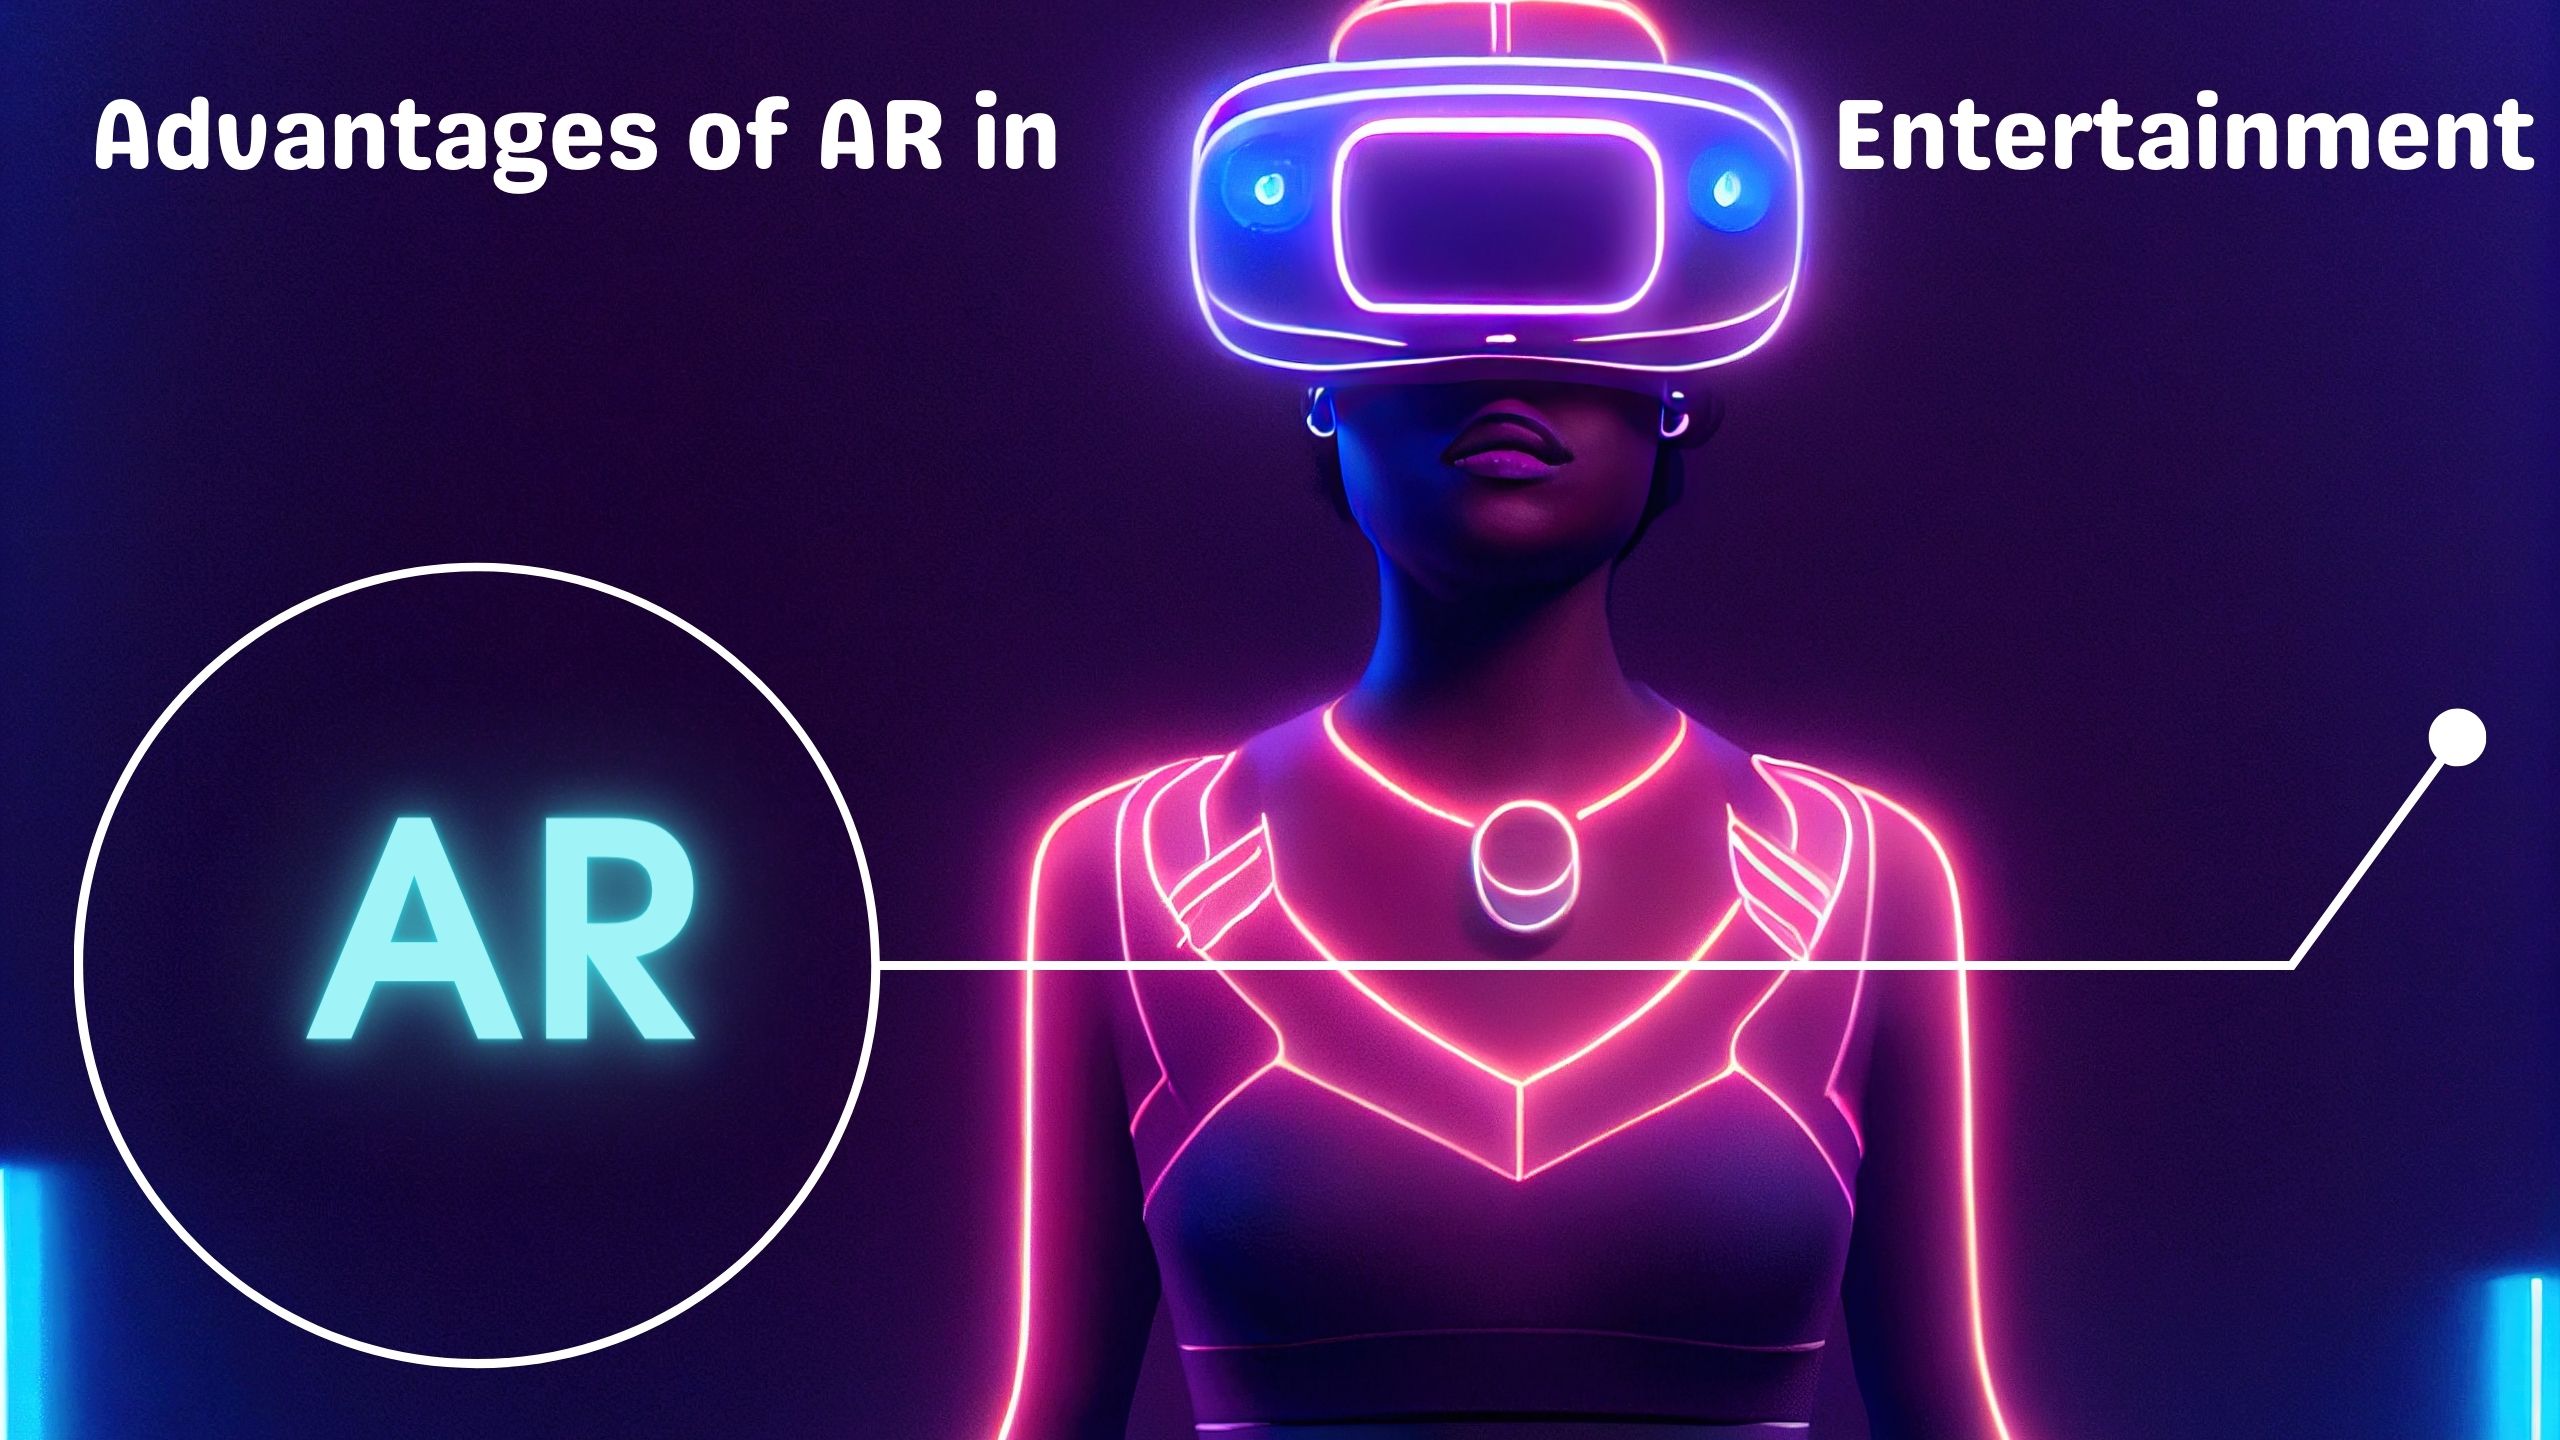 Advantages of AR in Entertainment